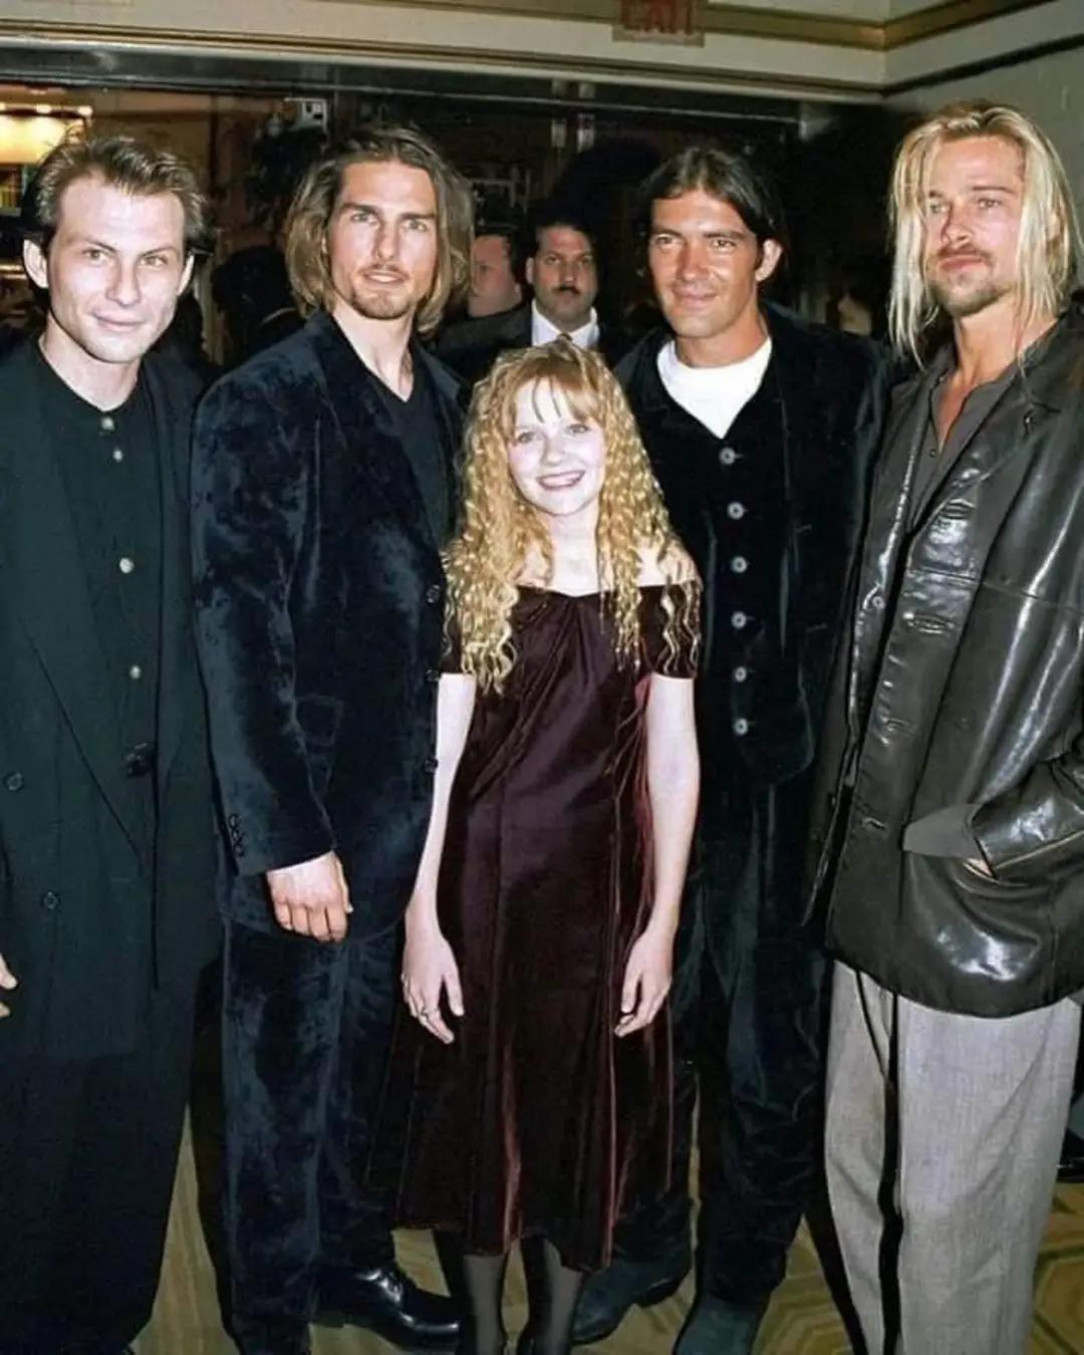 The cast of Interview with the Vampire at the premiere (1994)